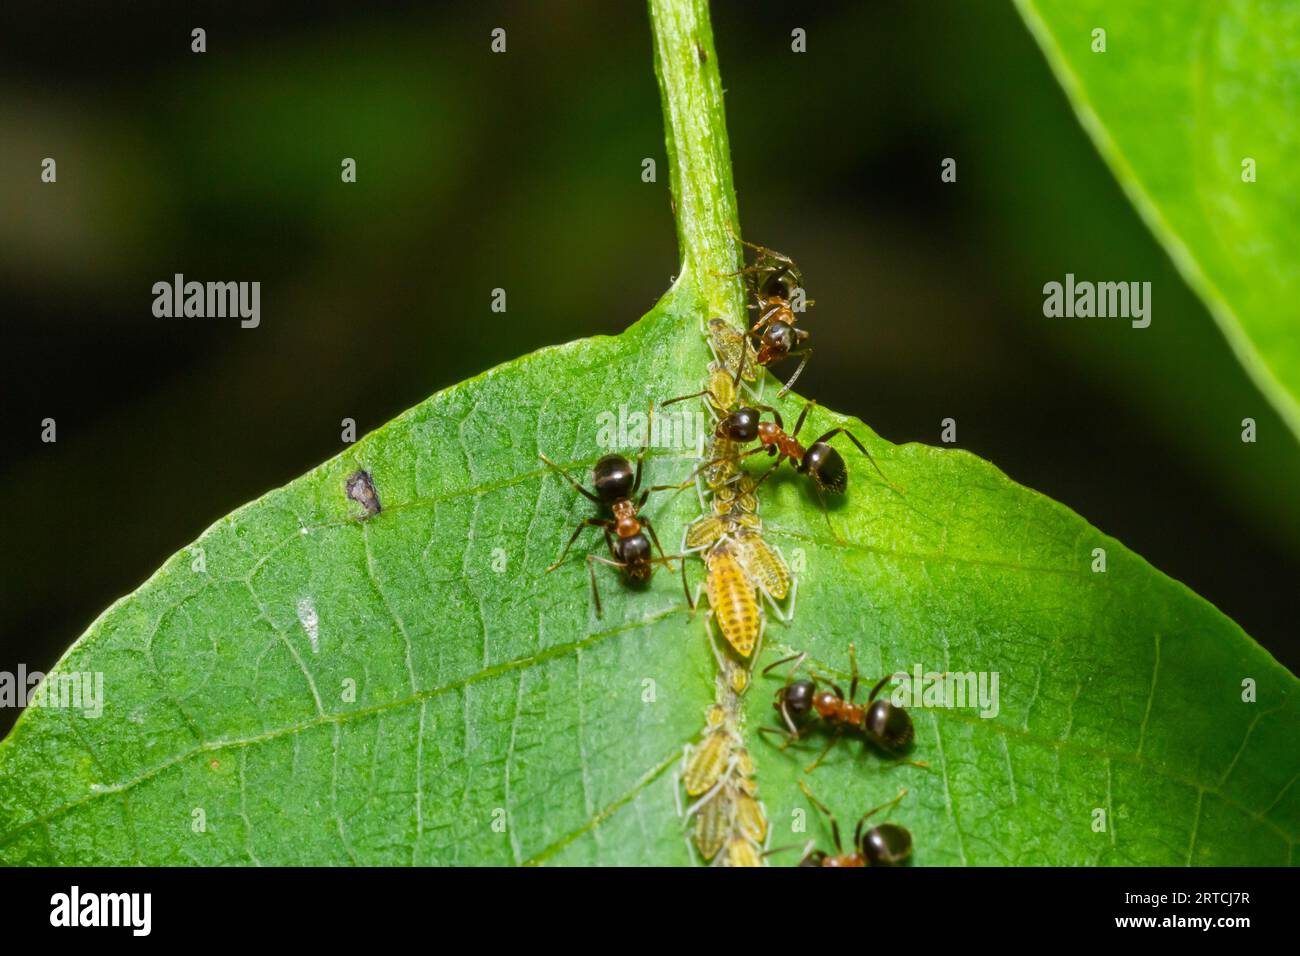 Ants collecting honeydew from greenflies aphids on a plant stem. Stock Photo